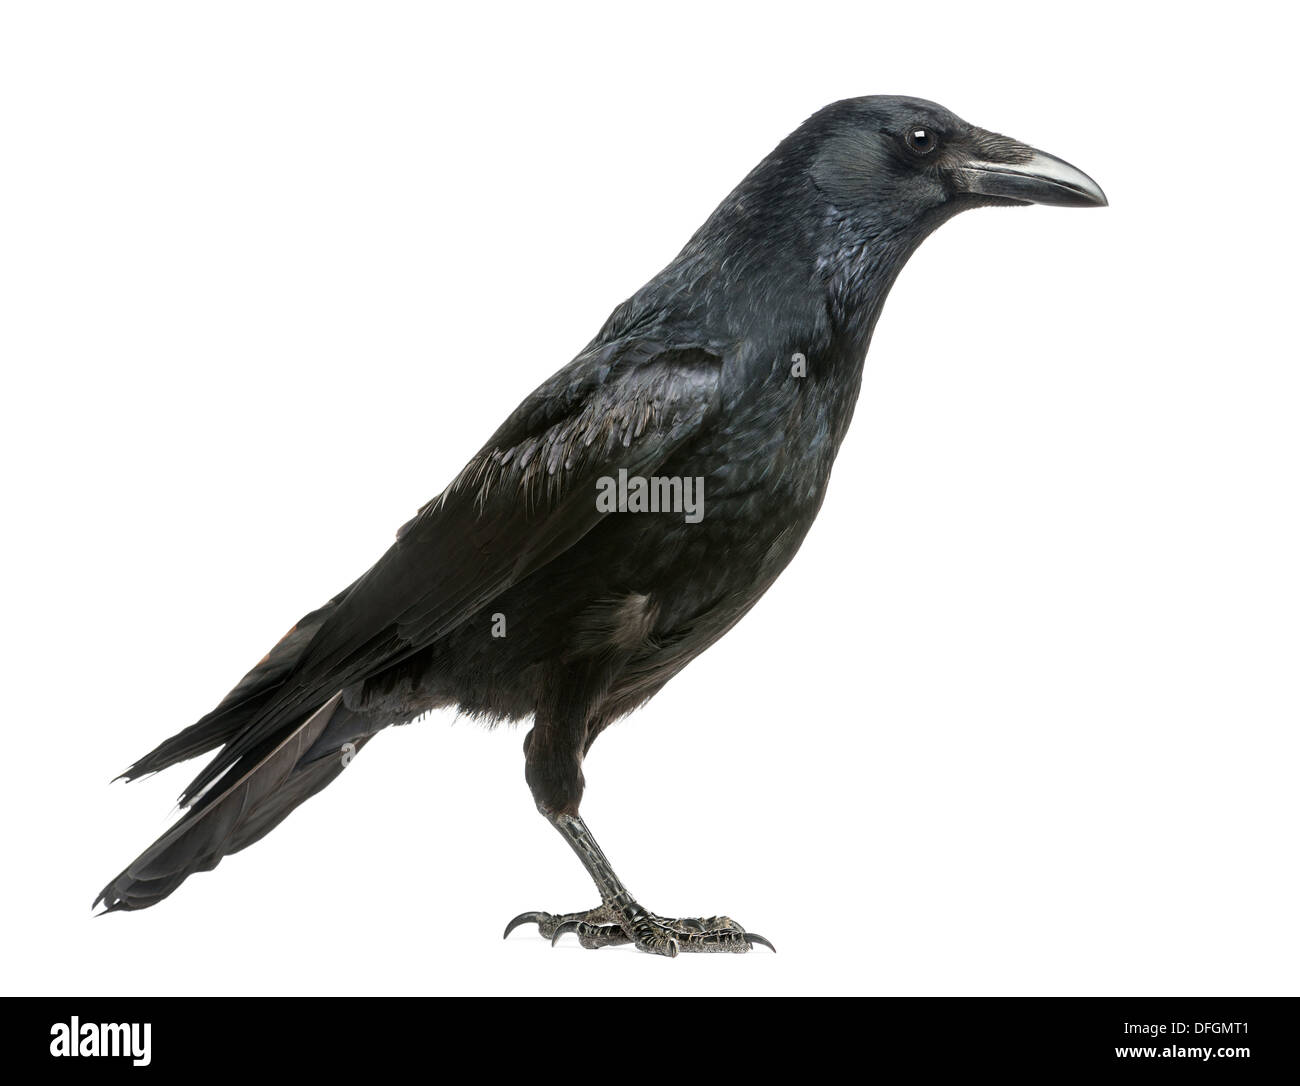 Side view of a Carrion Crow, Corvus corone, against white background Stock Photo